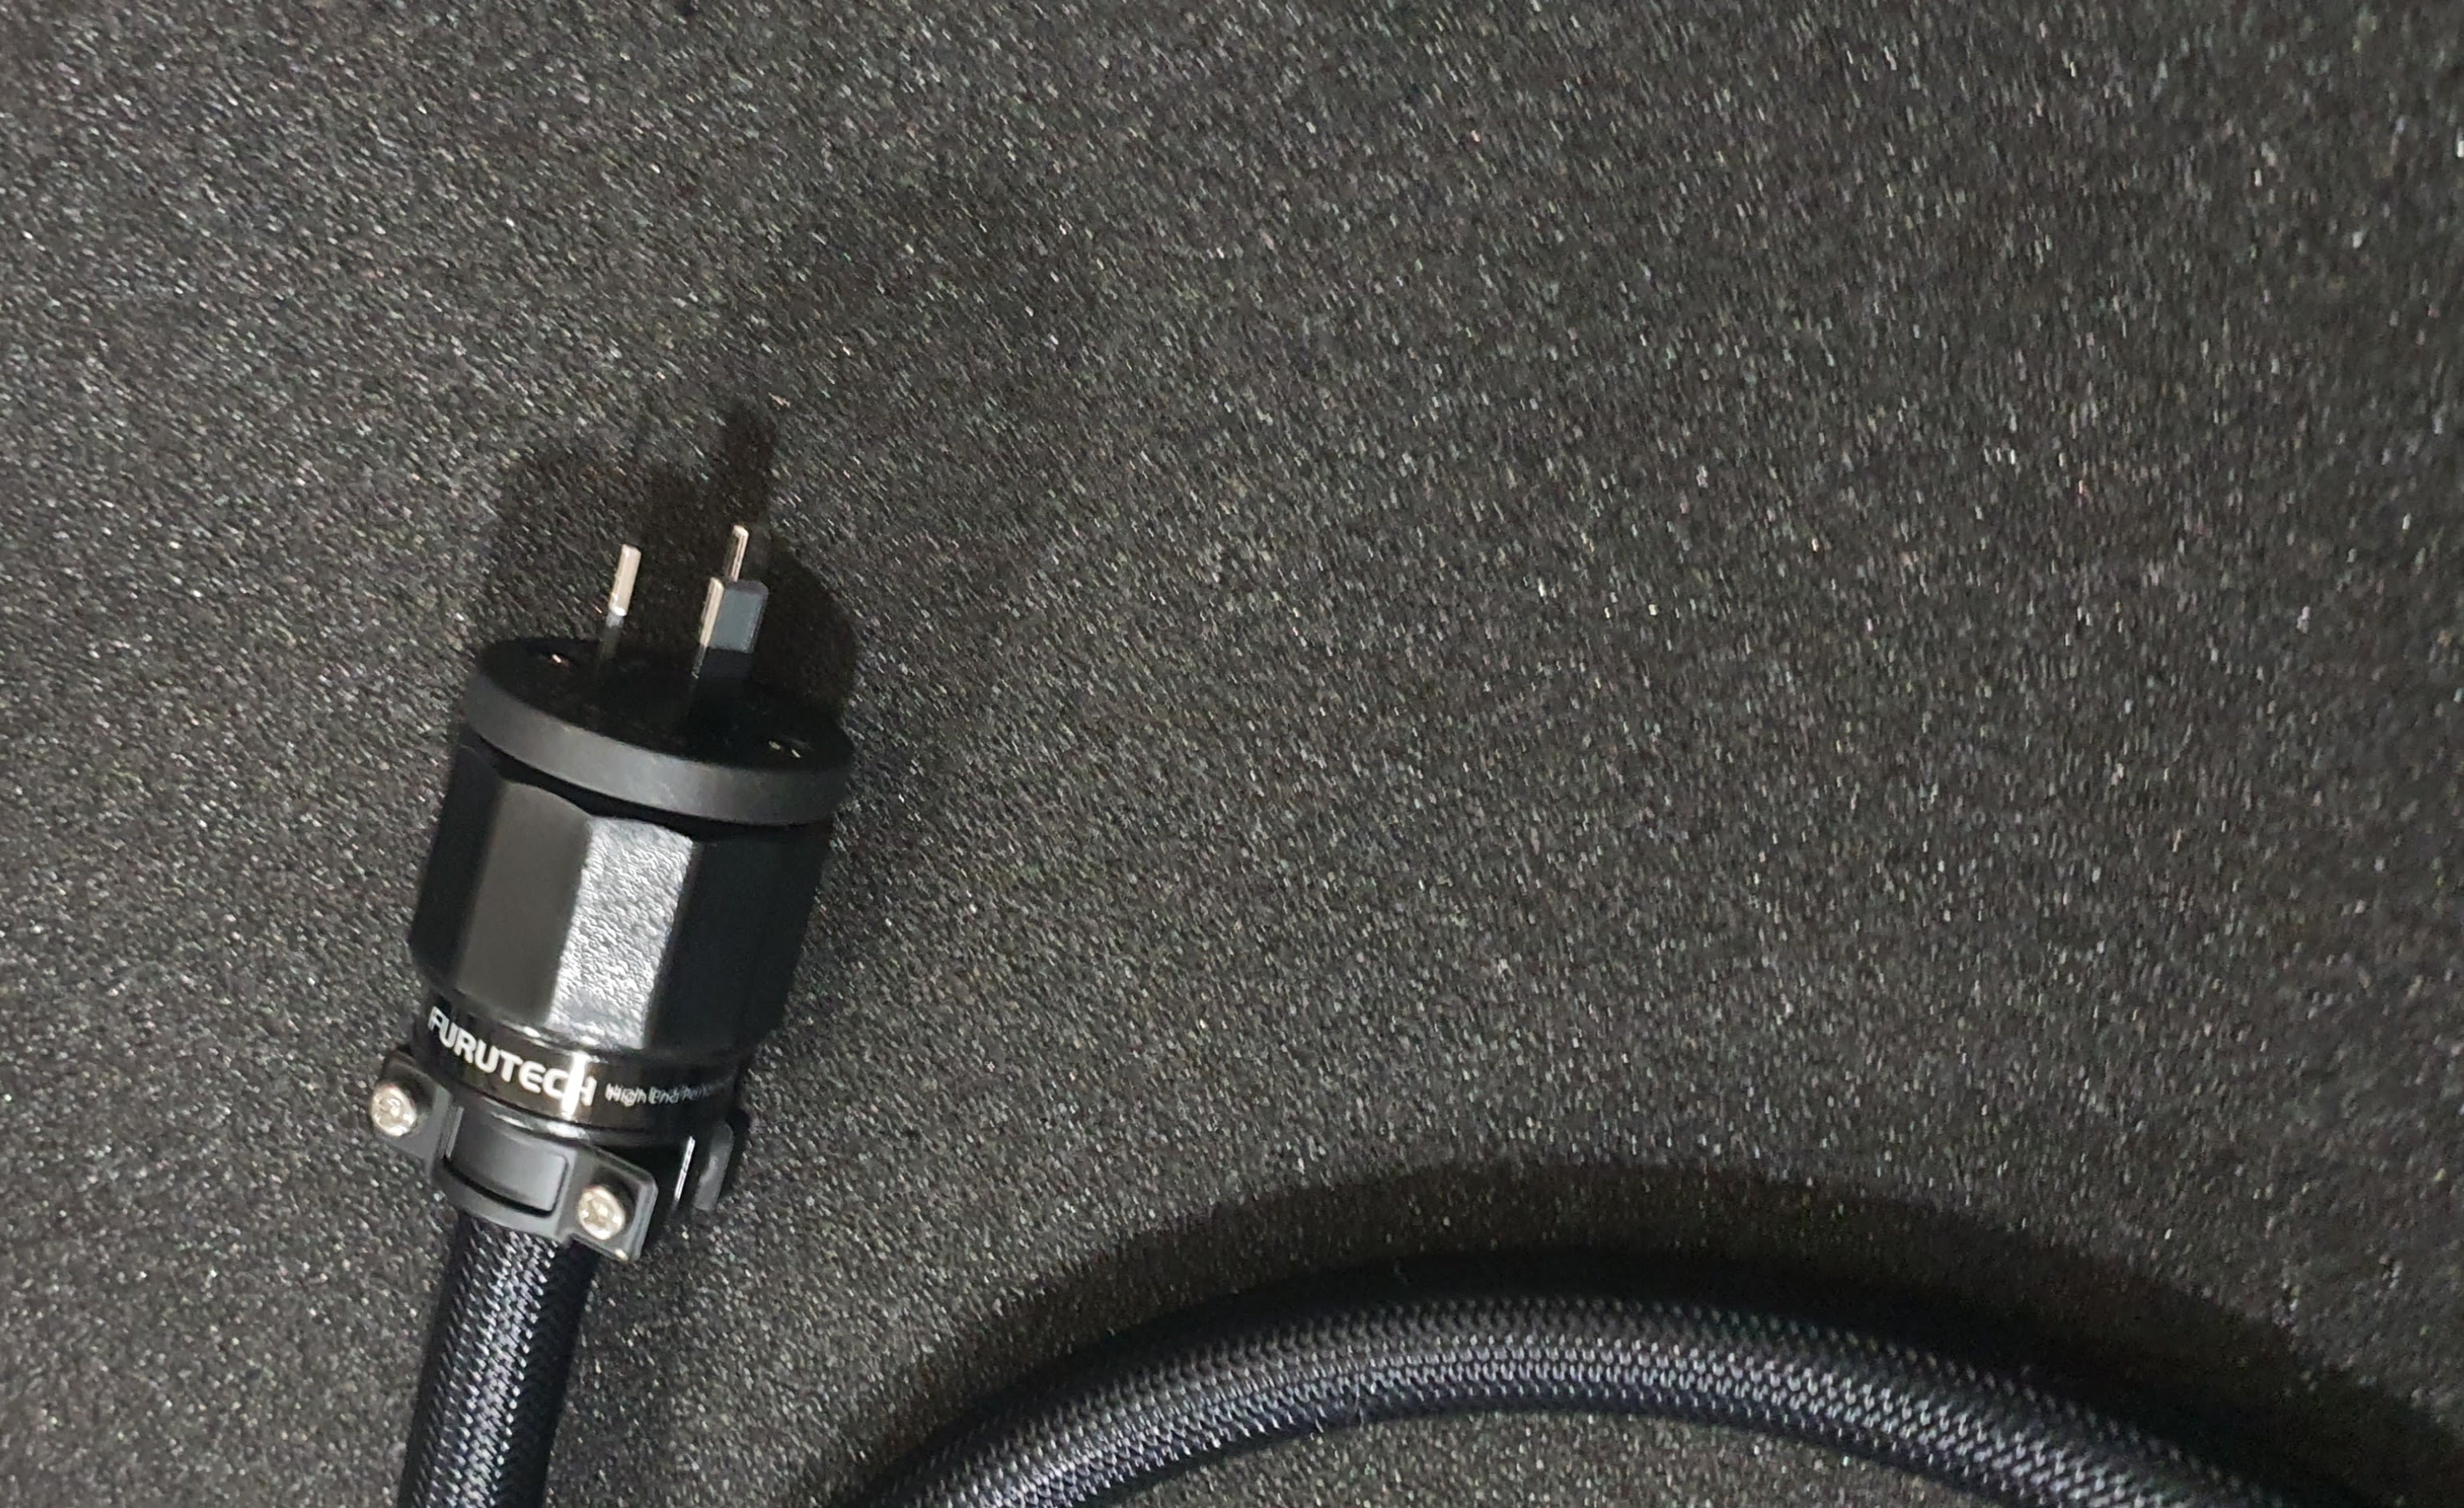 Furutech Alpha fp-s032n Mains cable tuned By A.L.A. Audio